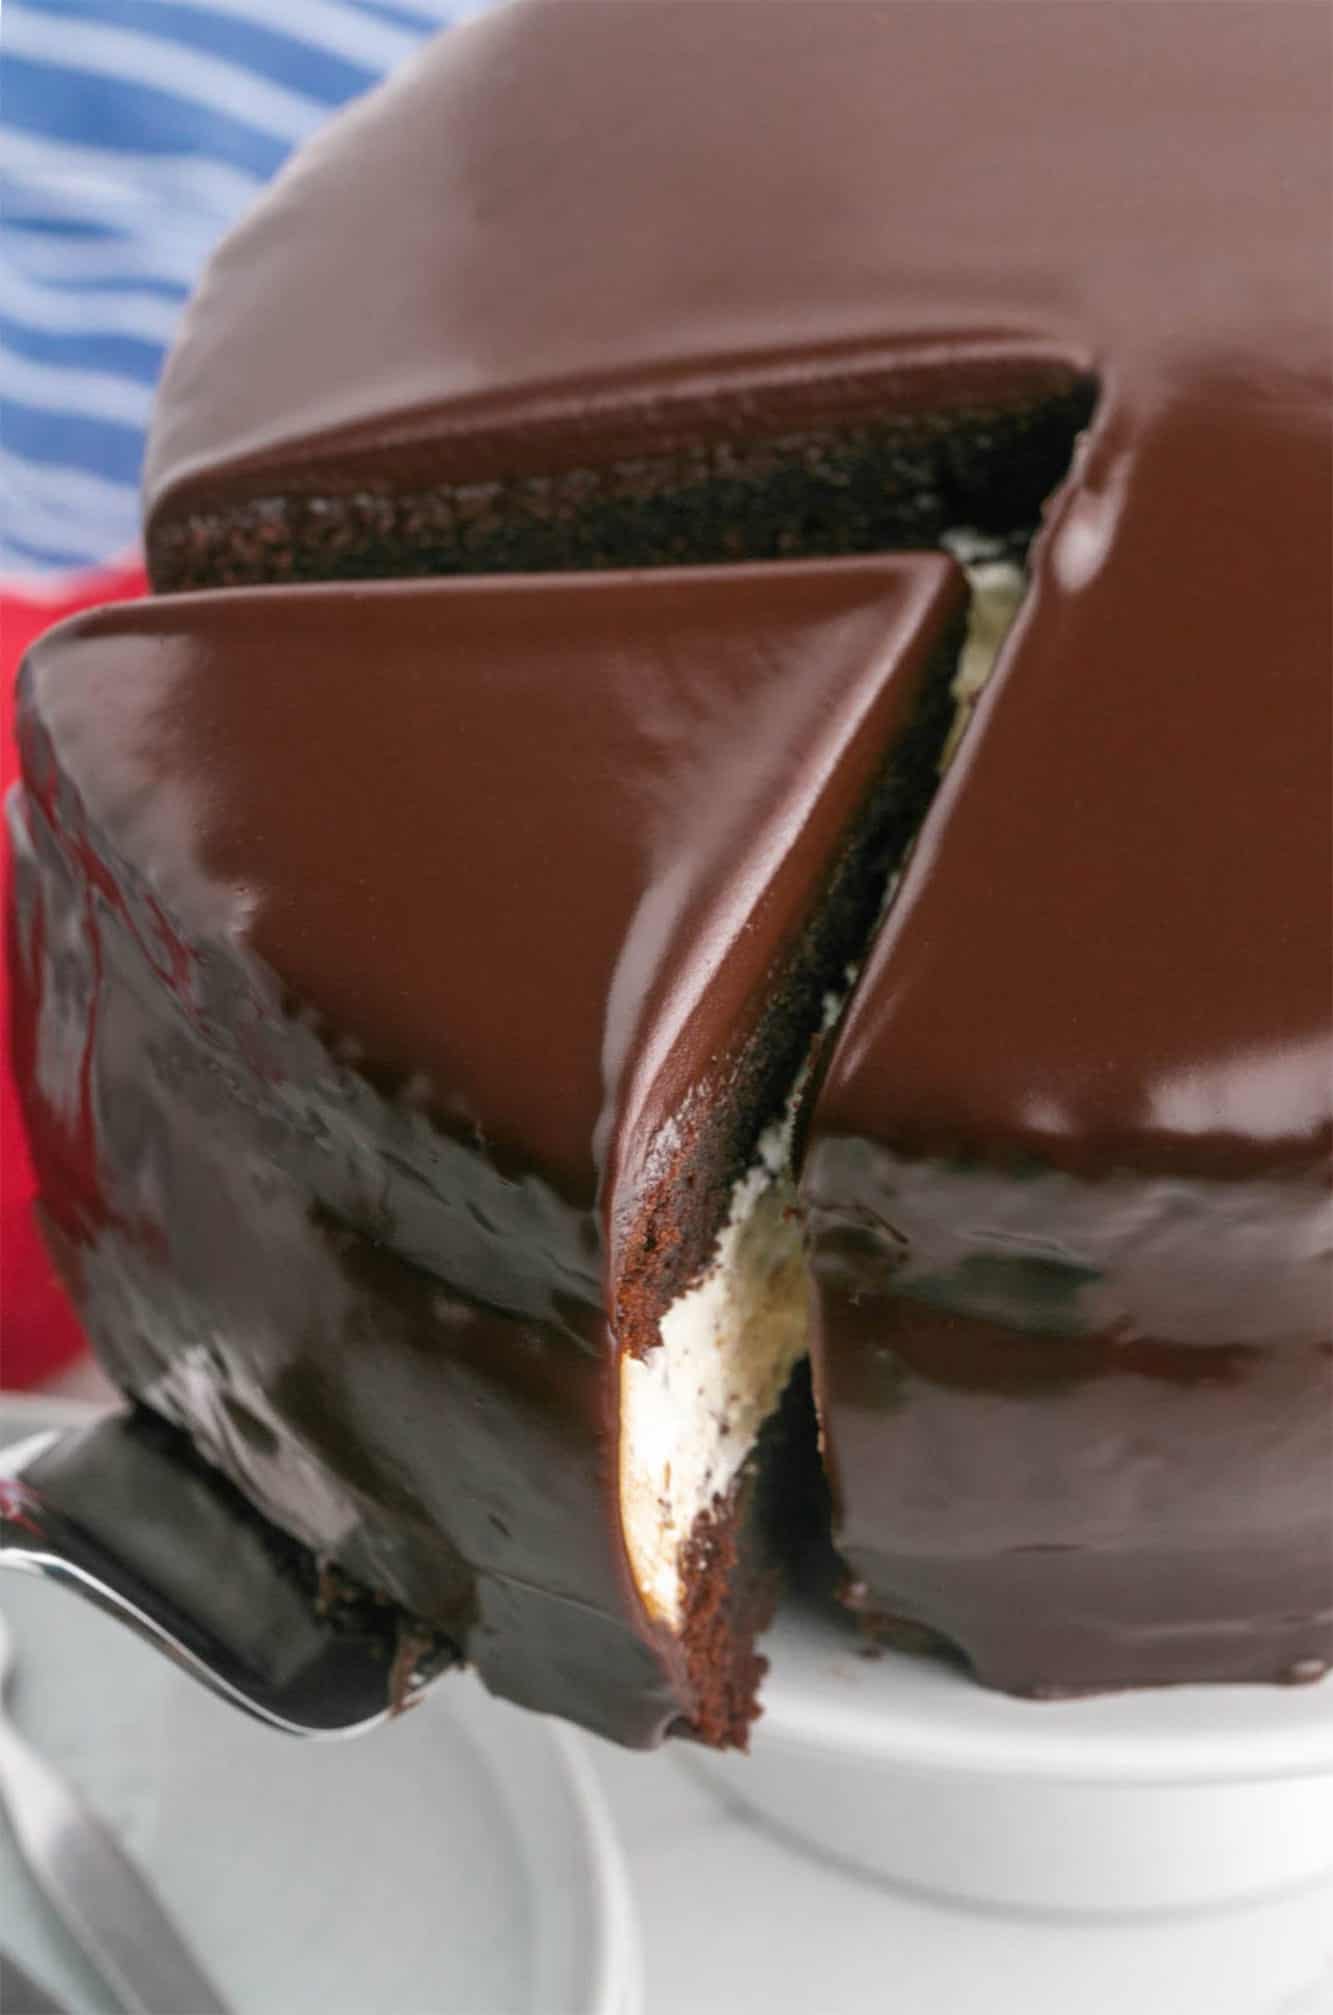 a slice of chocolate ding dong cake lifted away from the whole round cake.